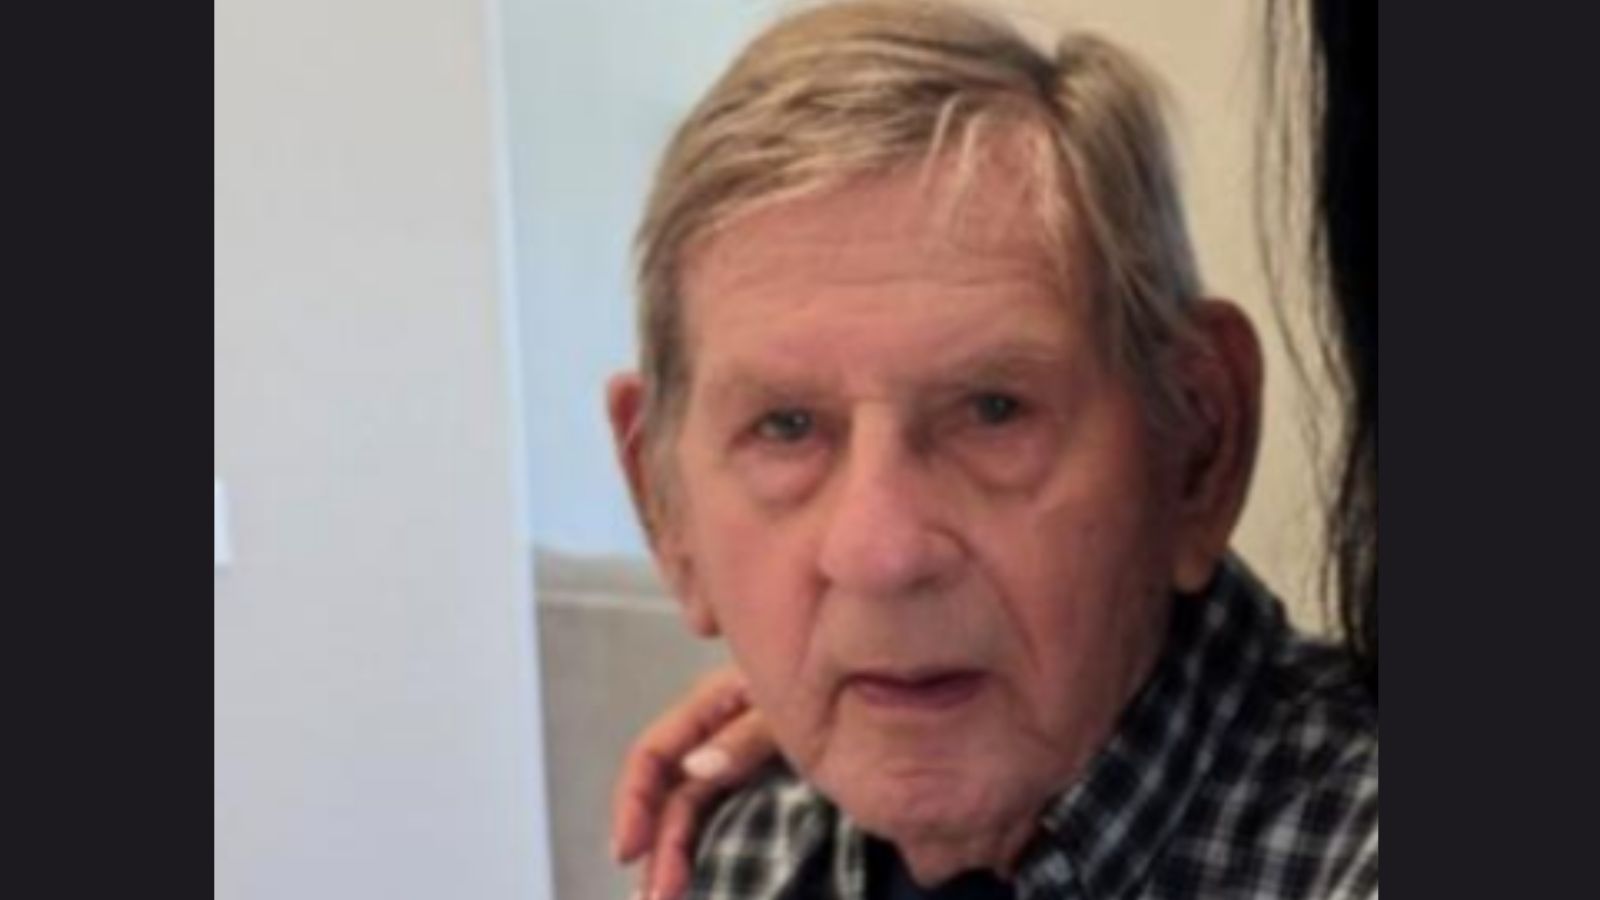 Missing 85-year-old man subject of new Silver Alert...